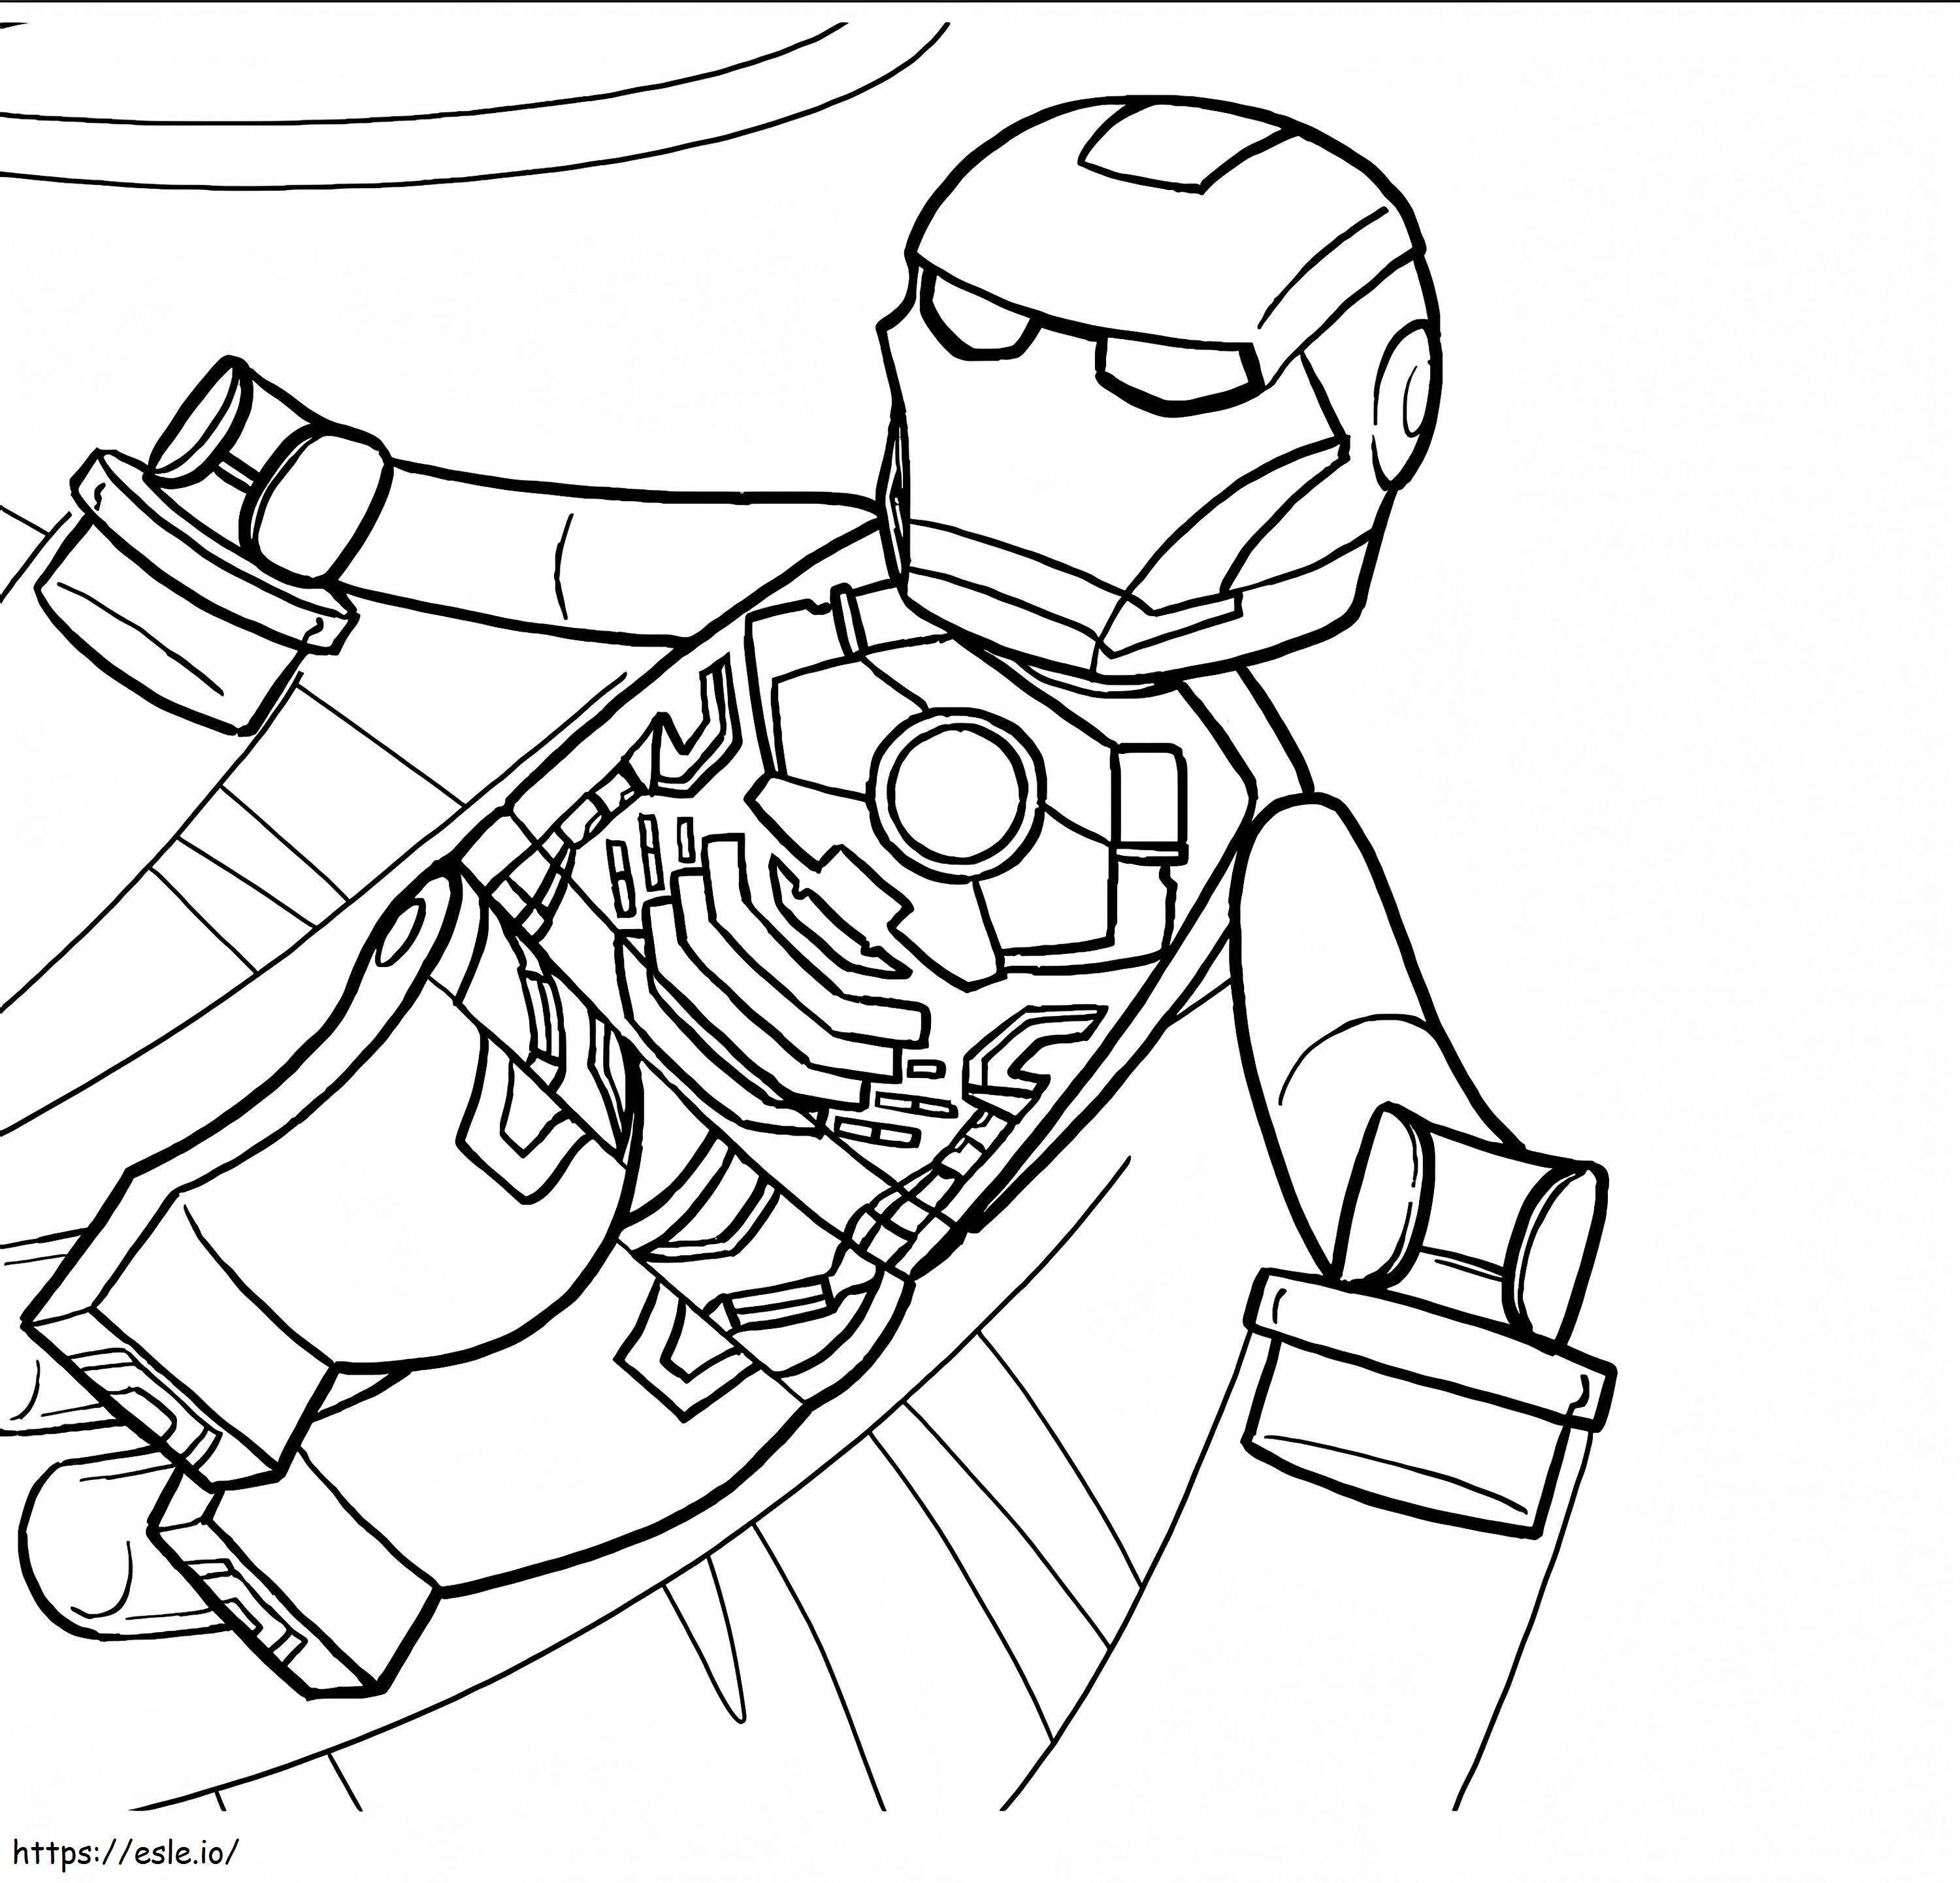 1531791930Lego Iron Man Flying A4 coloring page